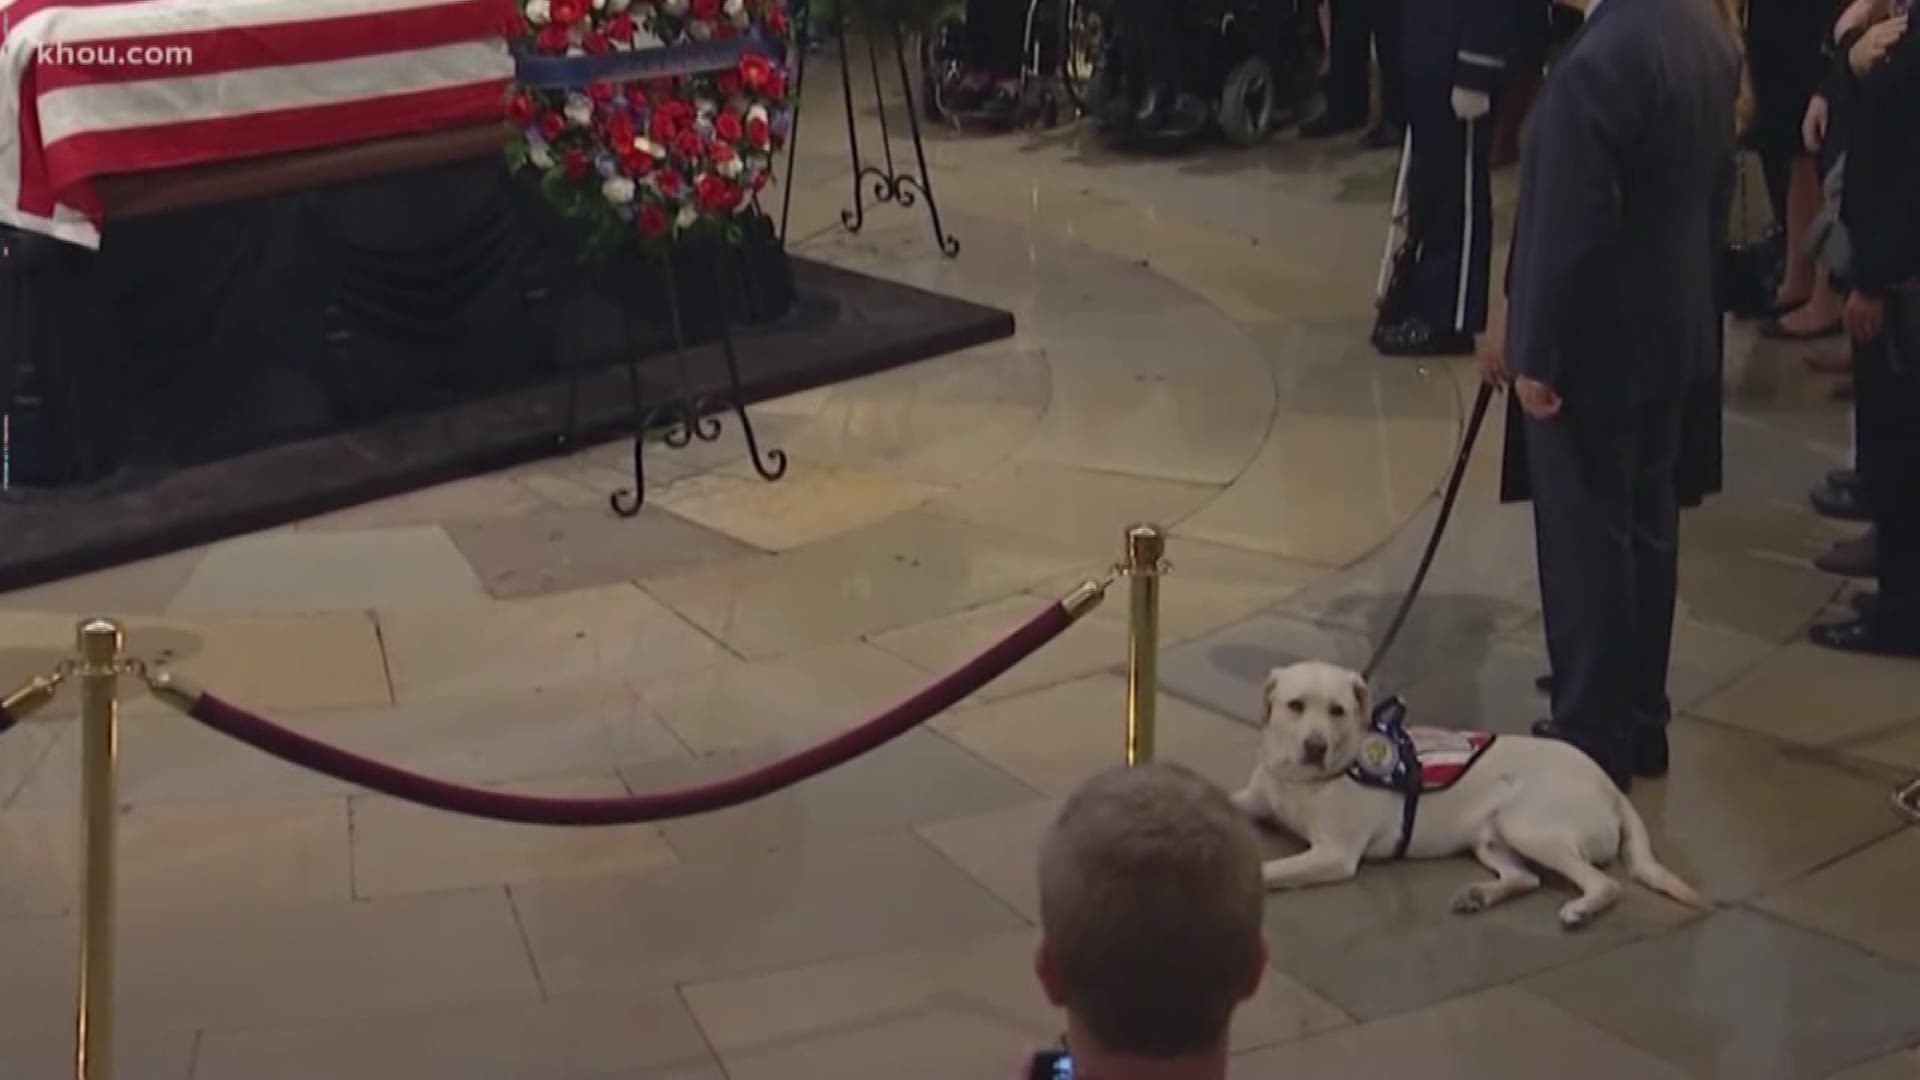 Is President George H.W. Bush's service dog Sully, or any dog that loses an owner, capable of grief?